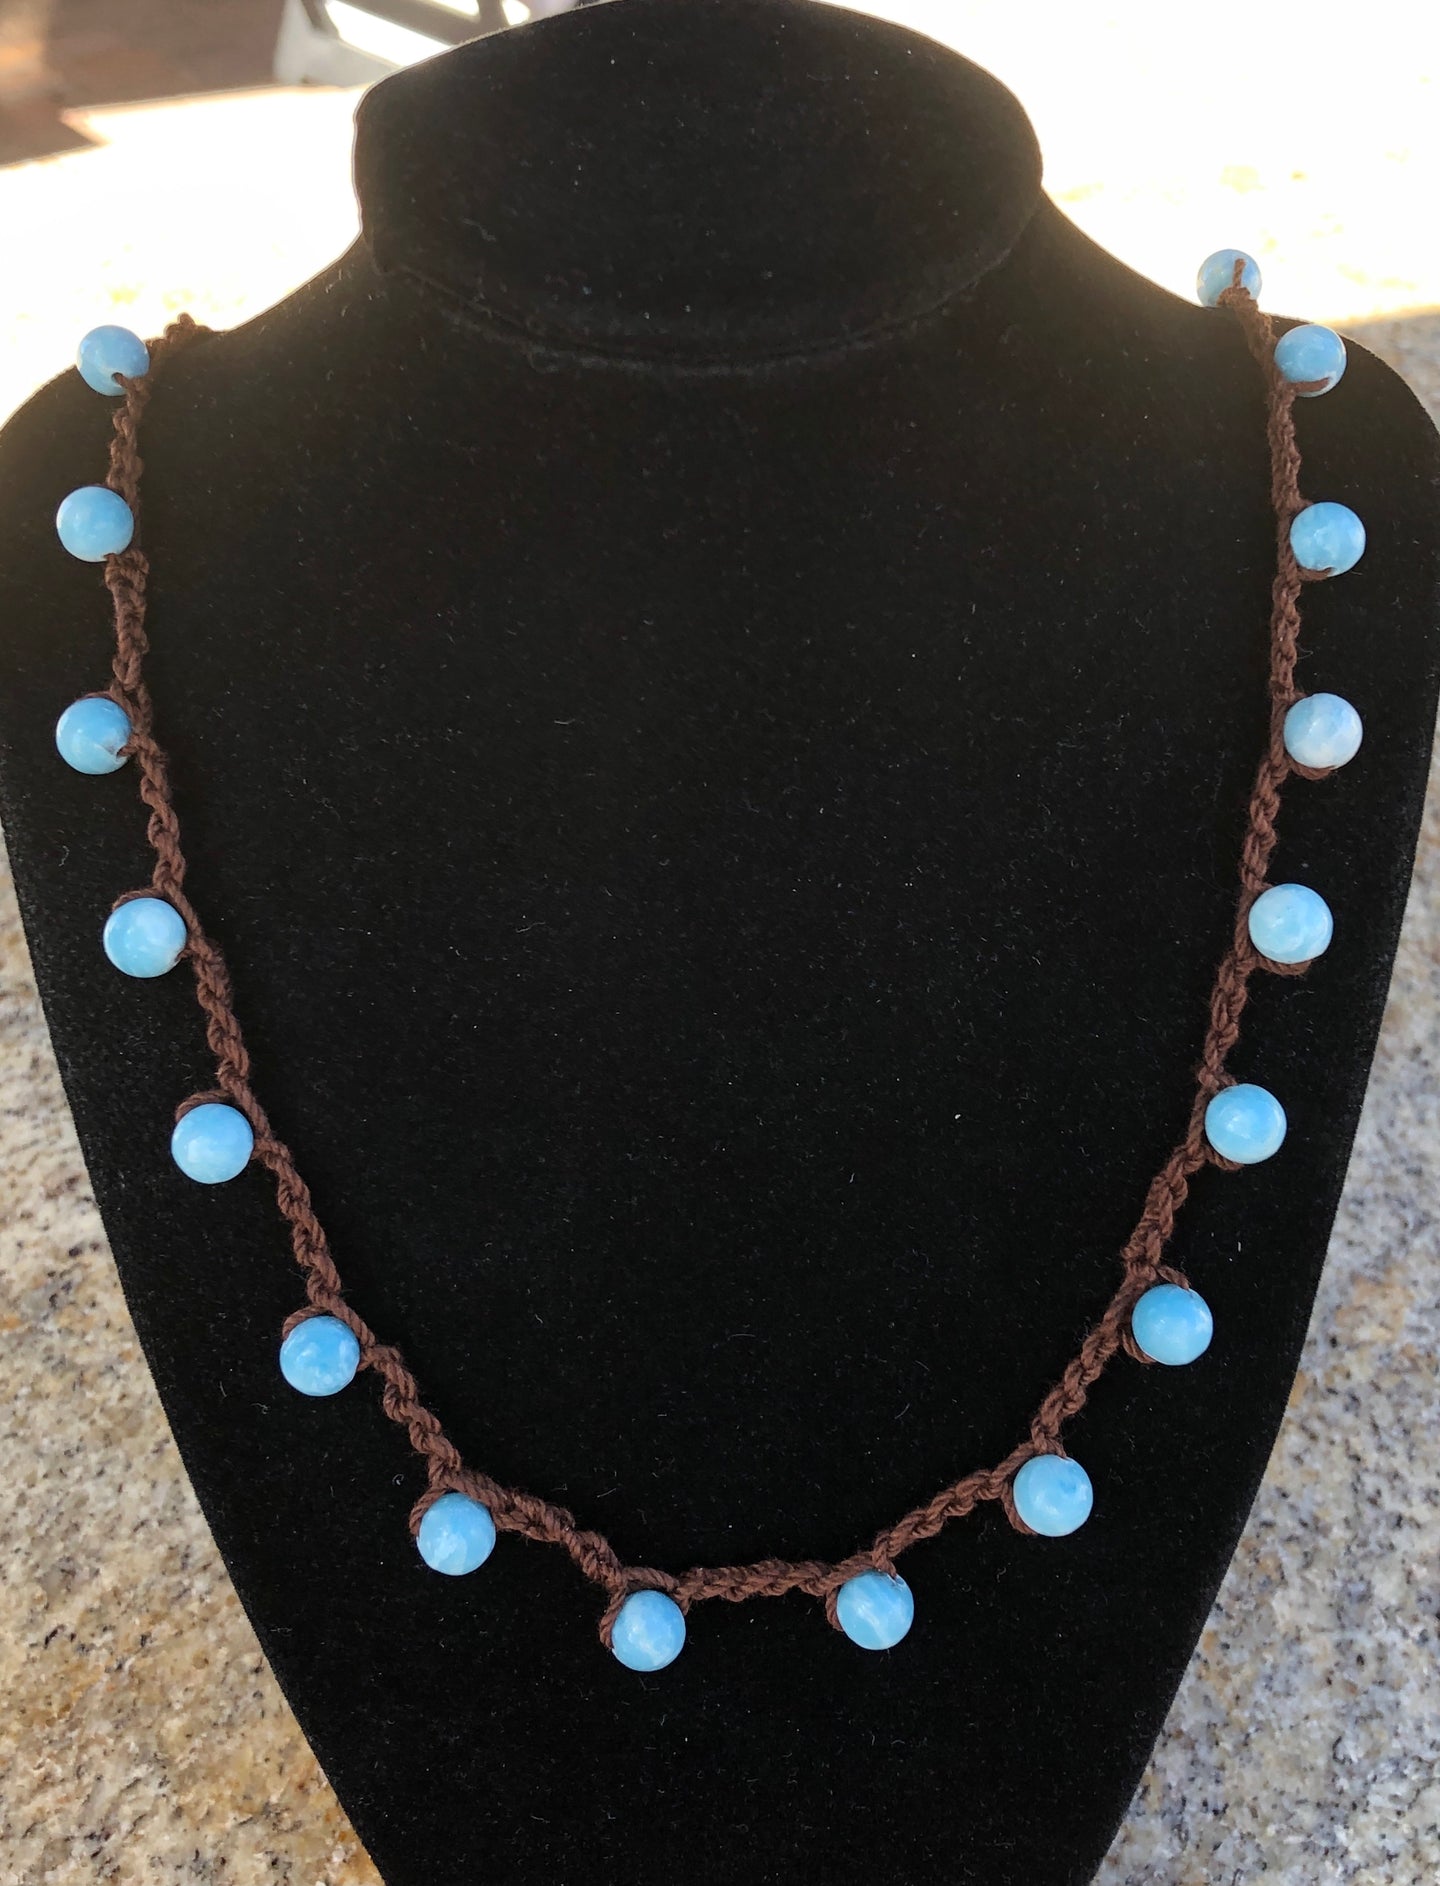 Necklace - Crocheted w/ Larimar Beads, Dominican